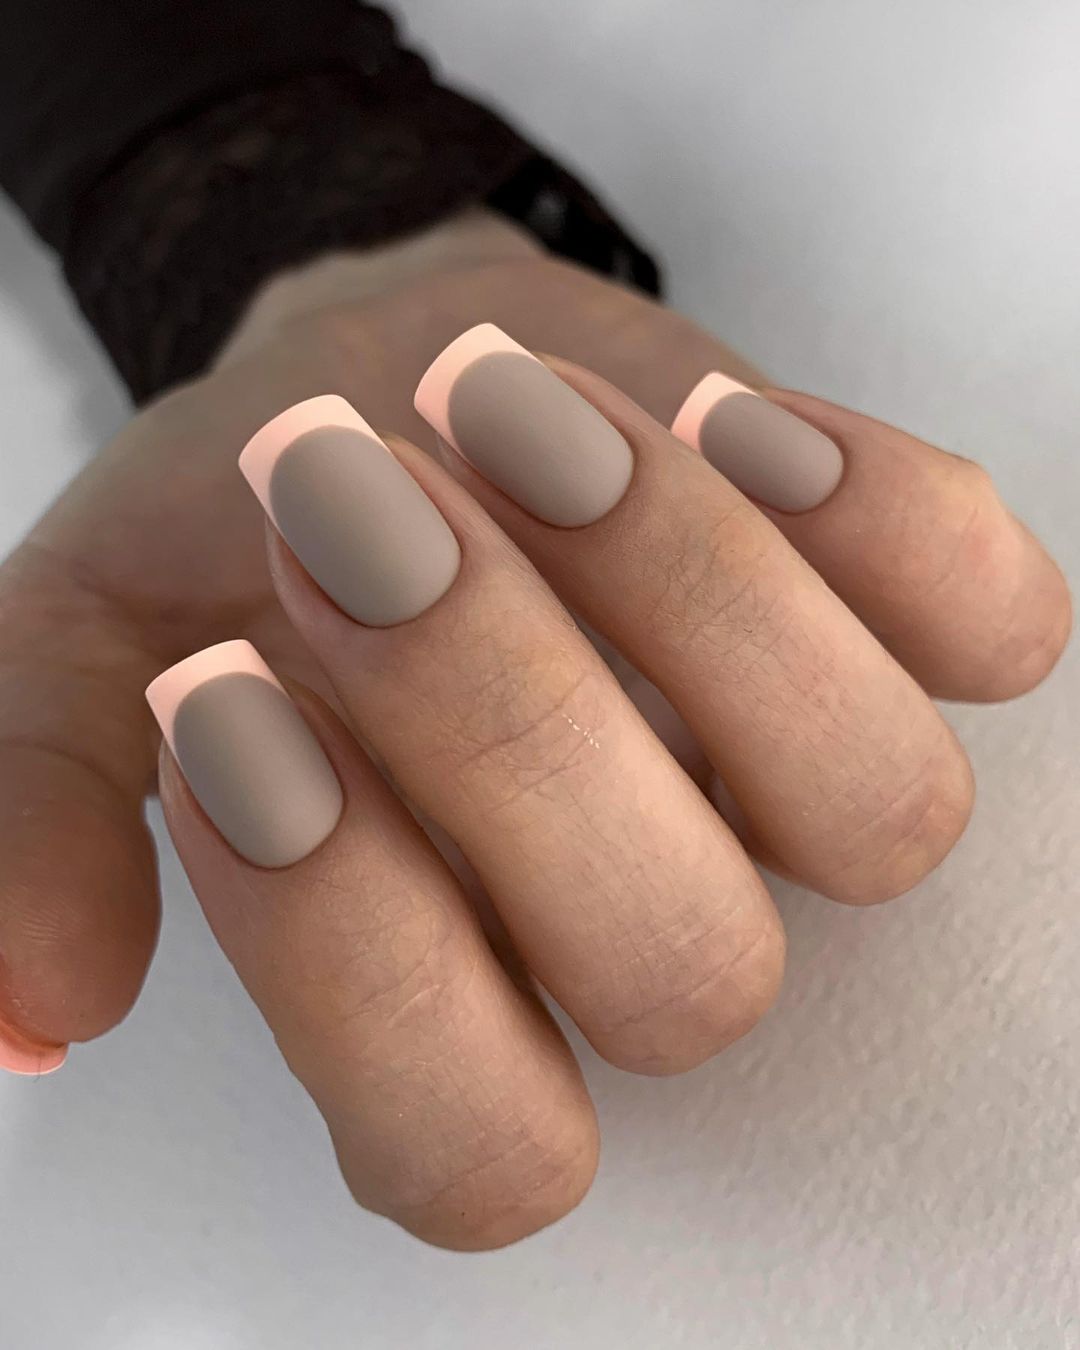 9 Nail Art For Short Nail Designs To Play With